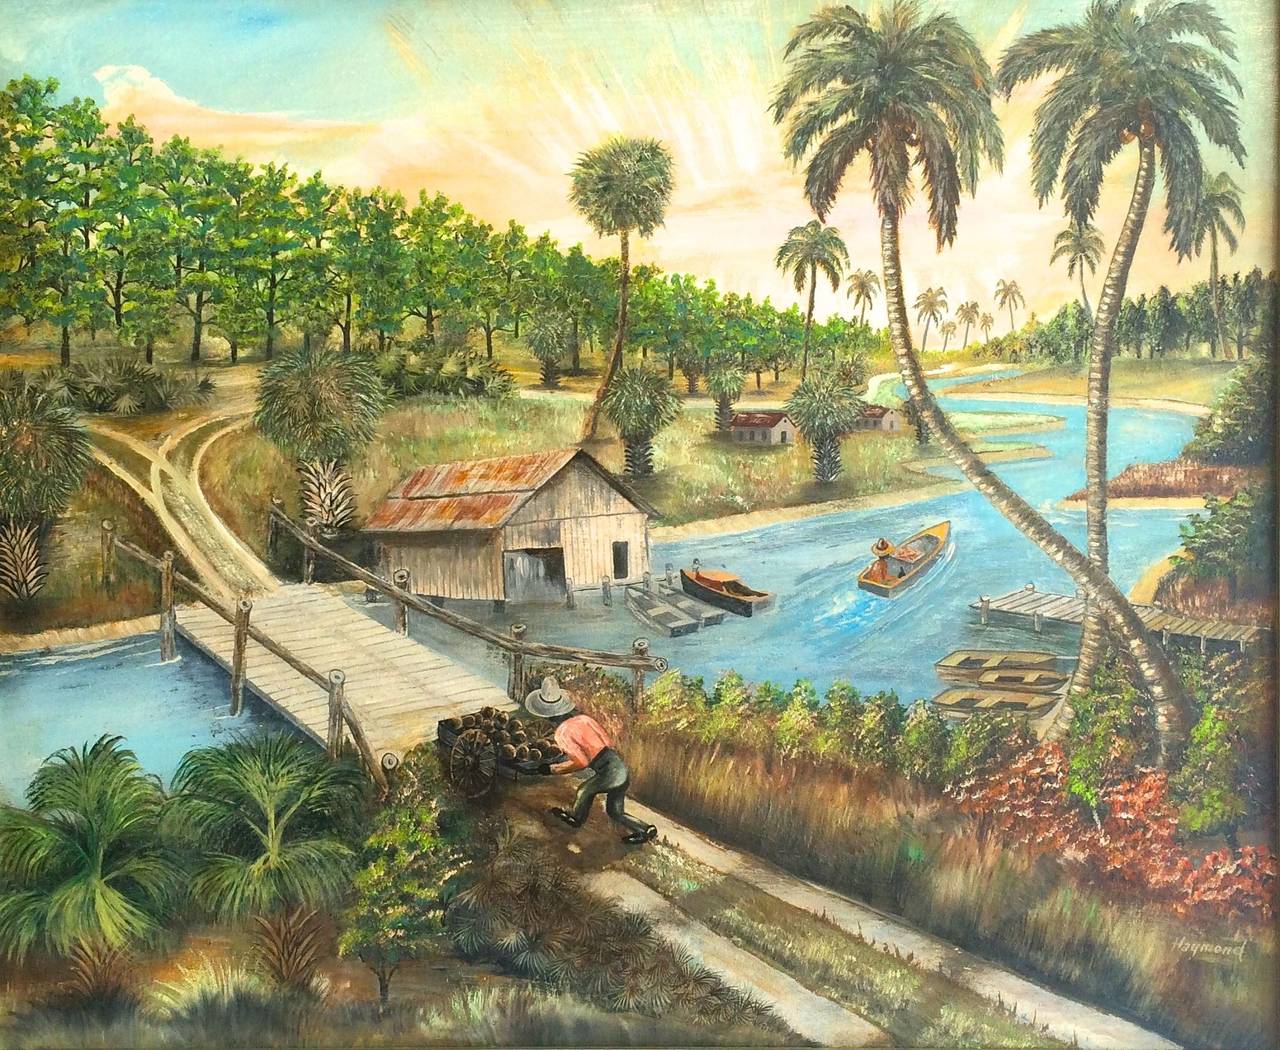 Mississippi River  - Painting by Soul Heymond